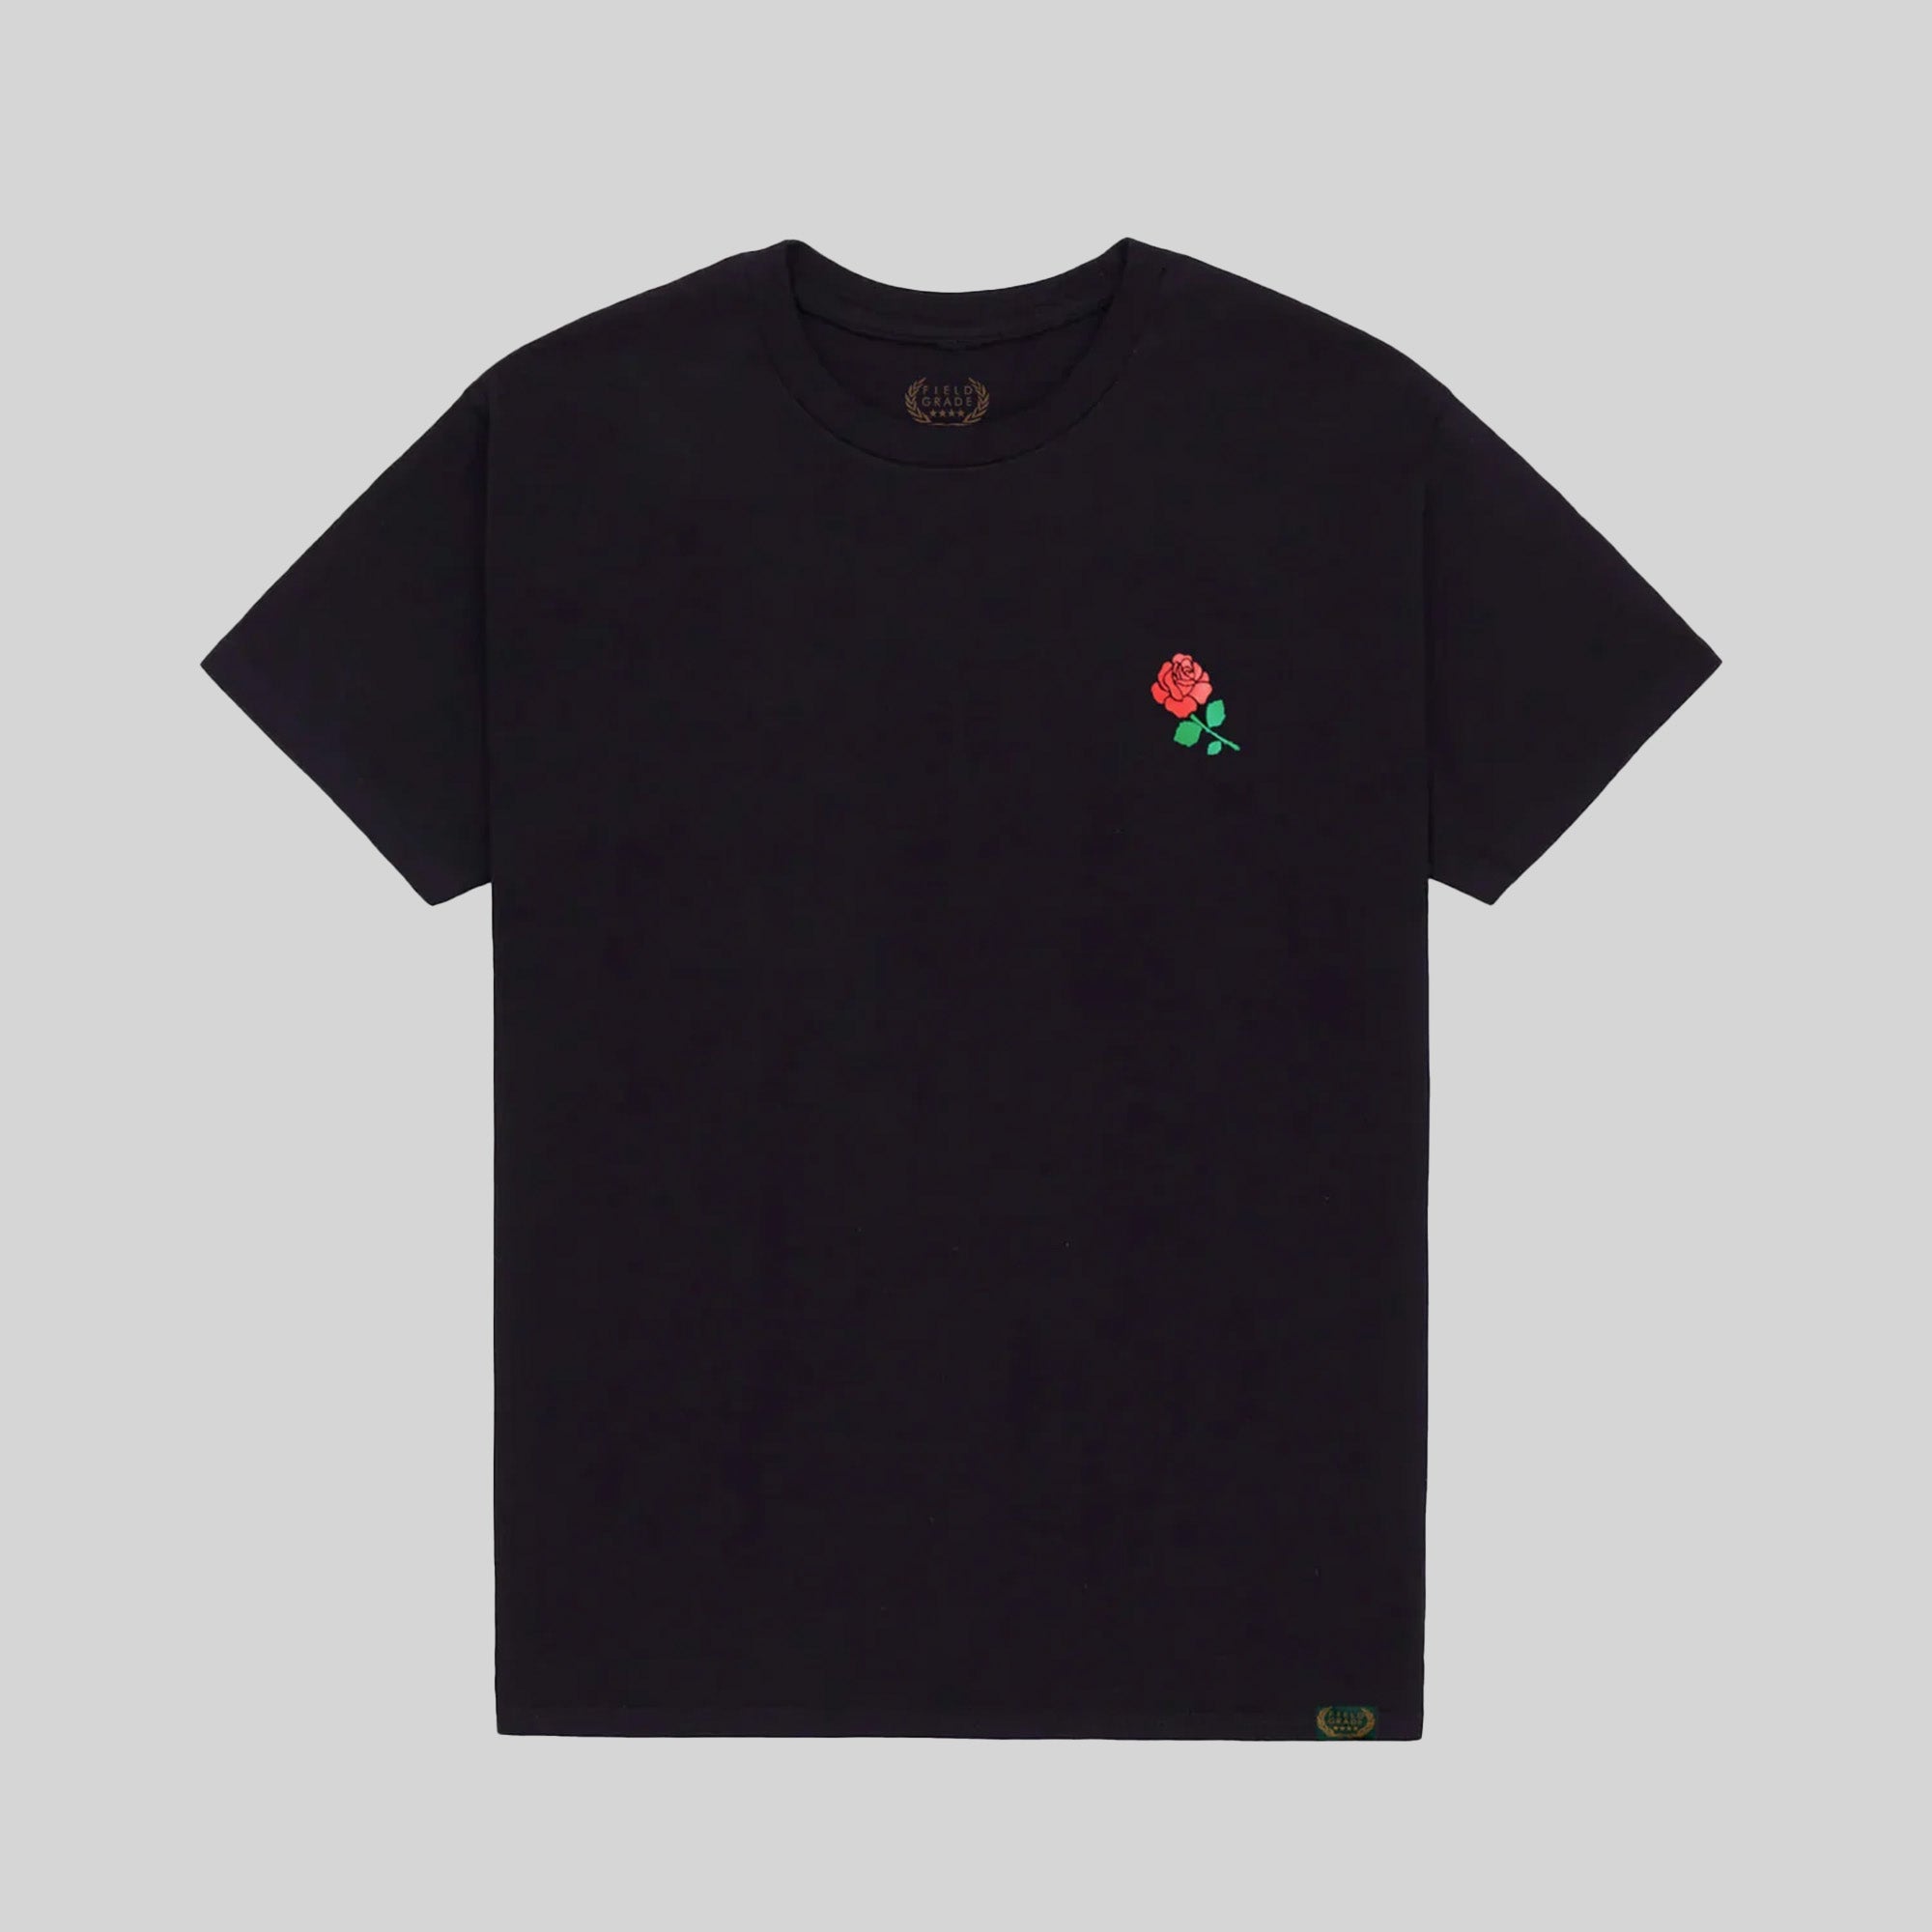 HAVE A NICE DAY - BLACK TEE